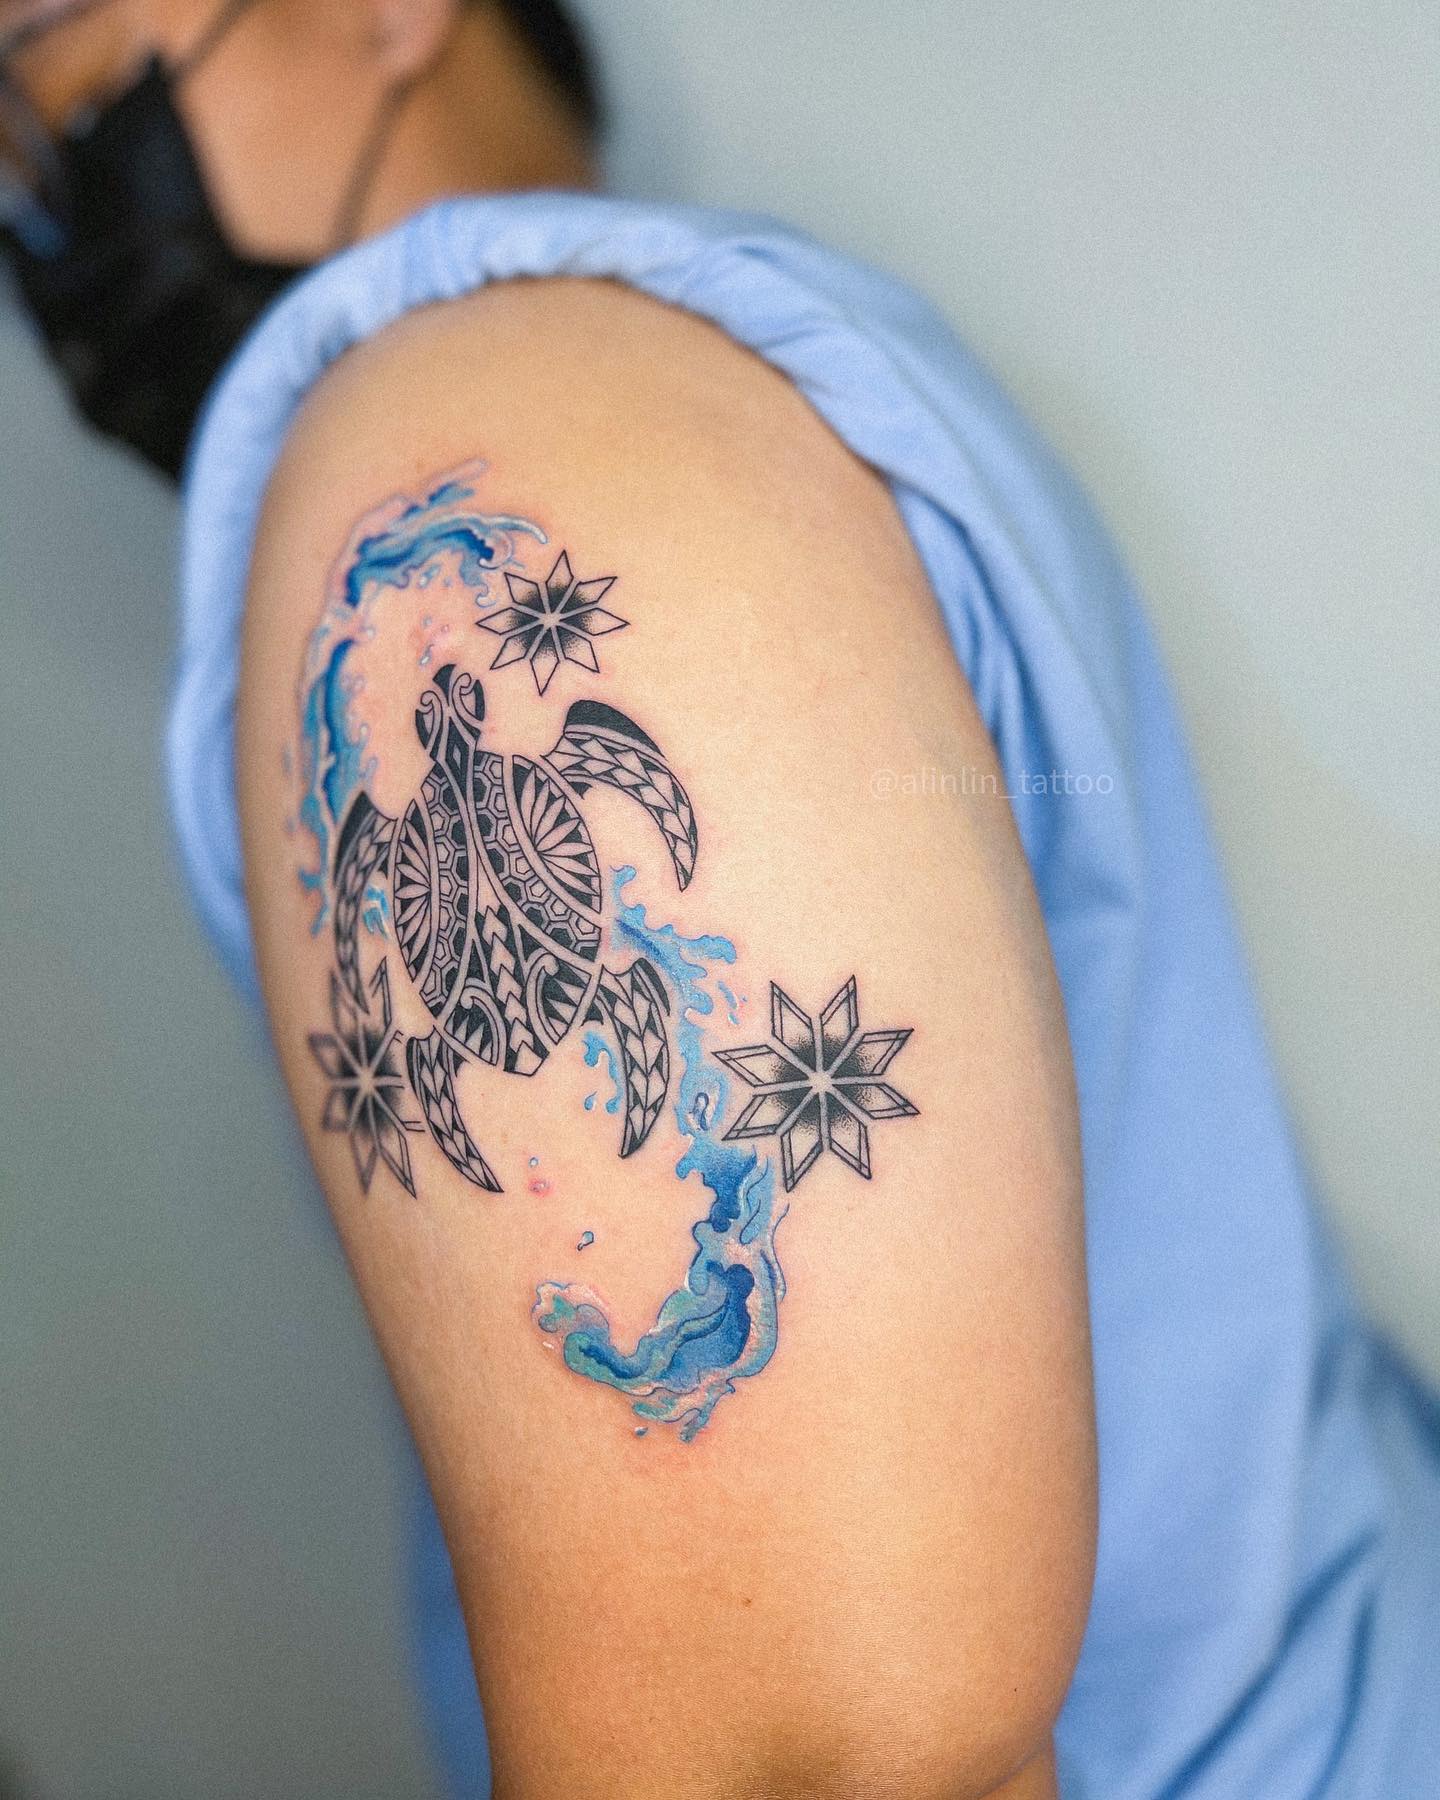 It's amazing to see how you a tattoo artist has managed to bring together the sacred, spiritual symbolism of the sea turtle and the esoteric art style. This tattoo is perfect for anyone who is looking for a piece that will be meaningful without being too obvious.